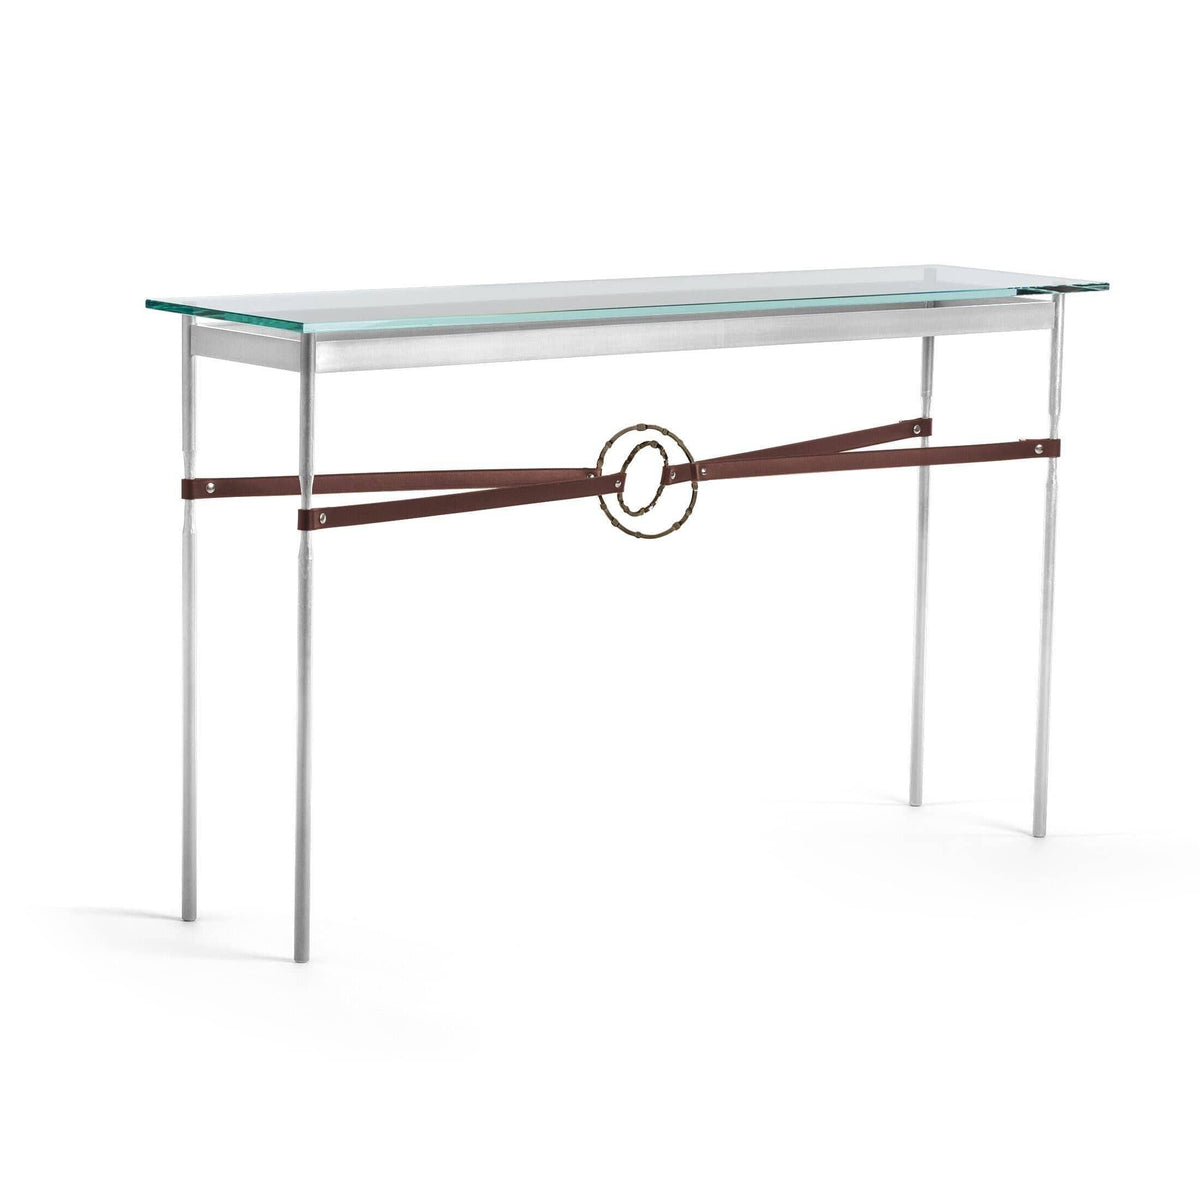 Hubbardton Forge - Equus Brown Leather Console Table - 750118-85-05-LB-VA0714 | Montreal Lighting & Hardware